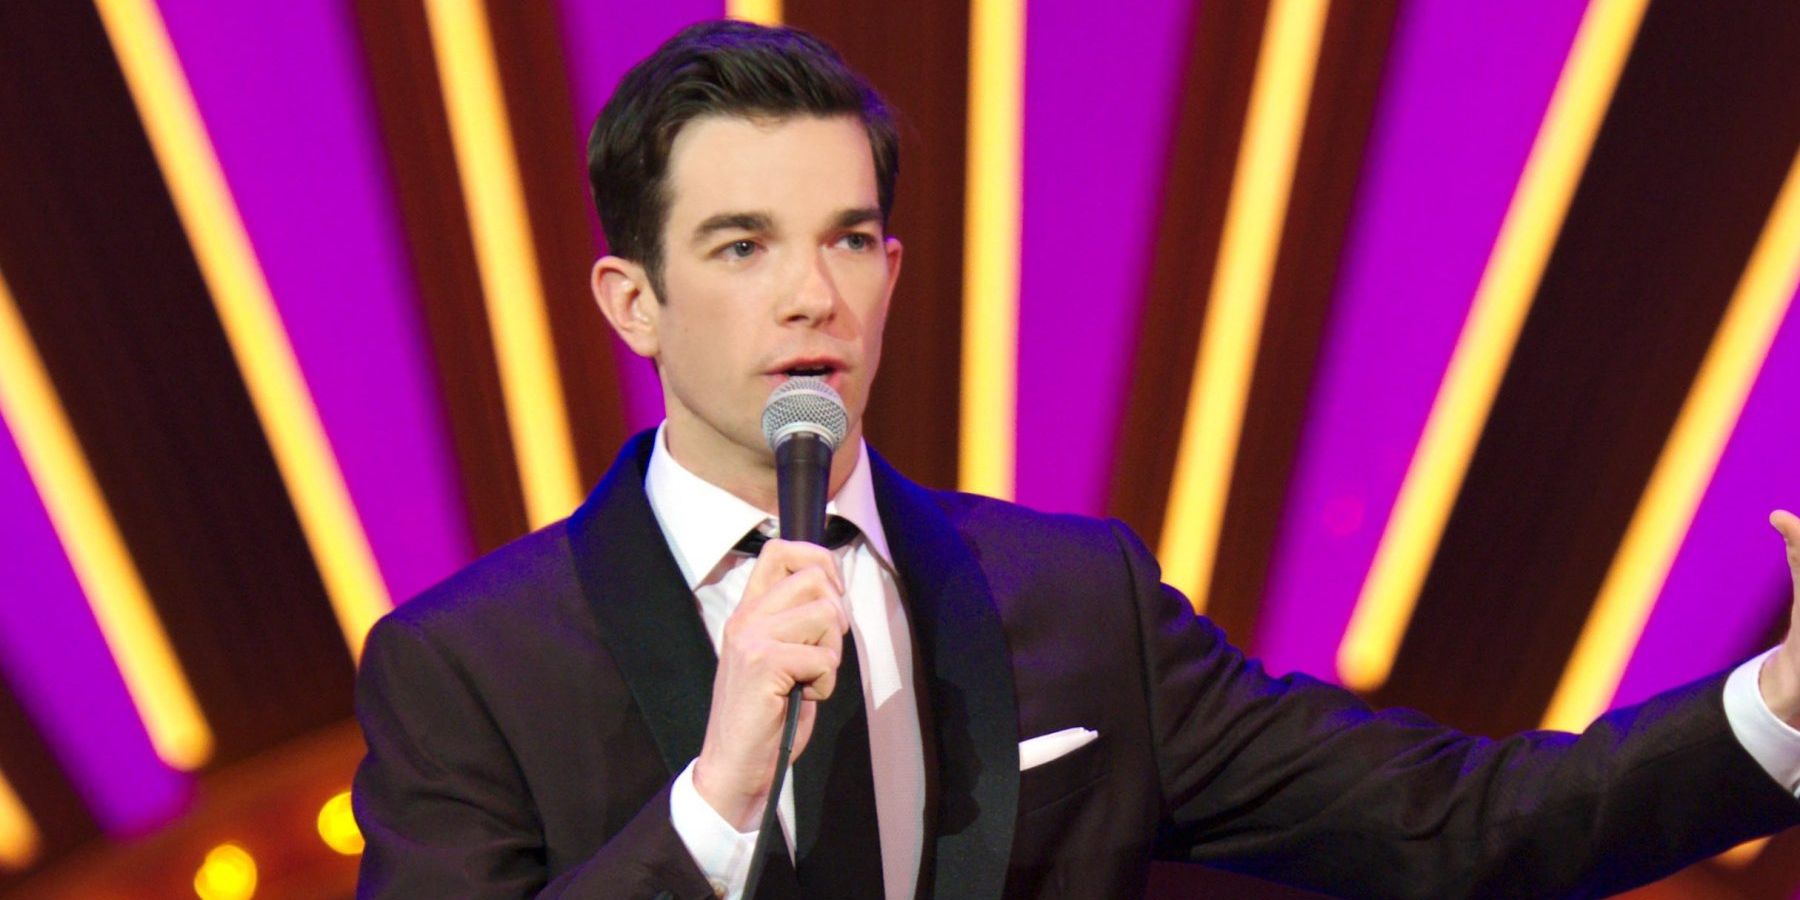 John Mulaney gestures for emphasis in Kid Gorgeous